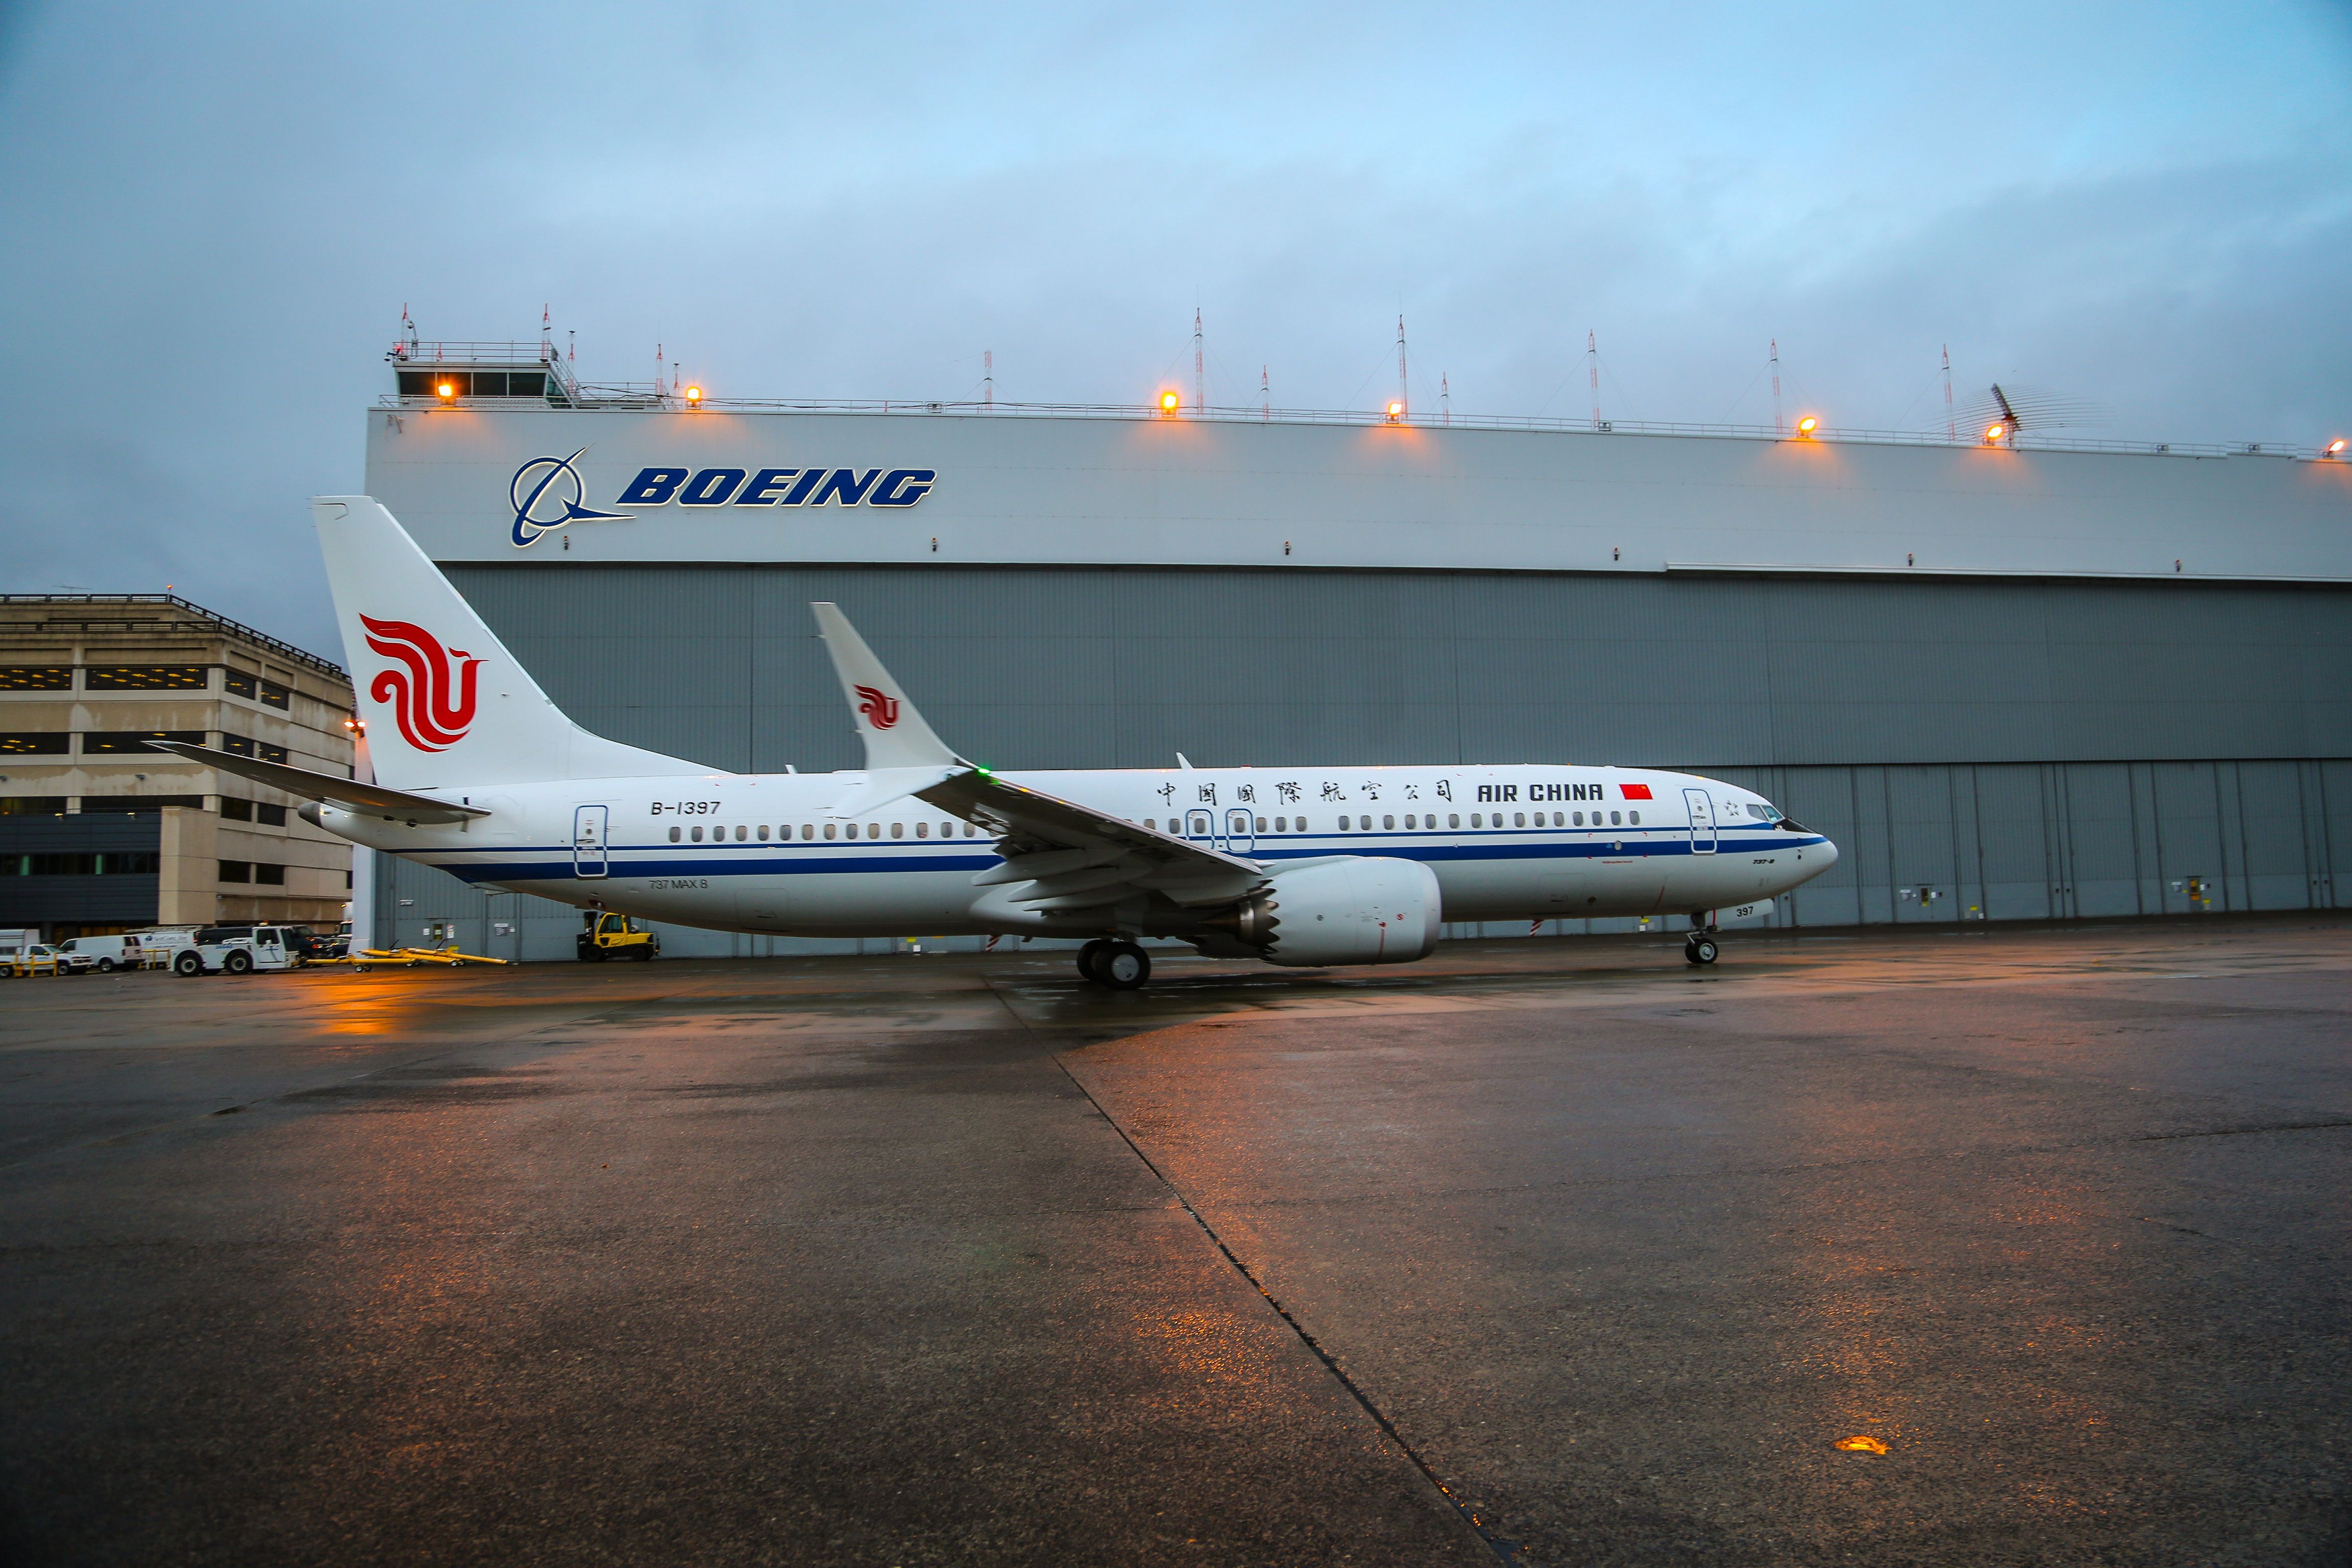 An Air China Boeing 737 MAX 8 parked on an airport apron.